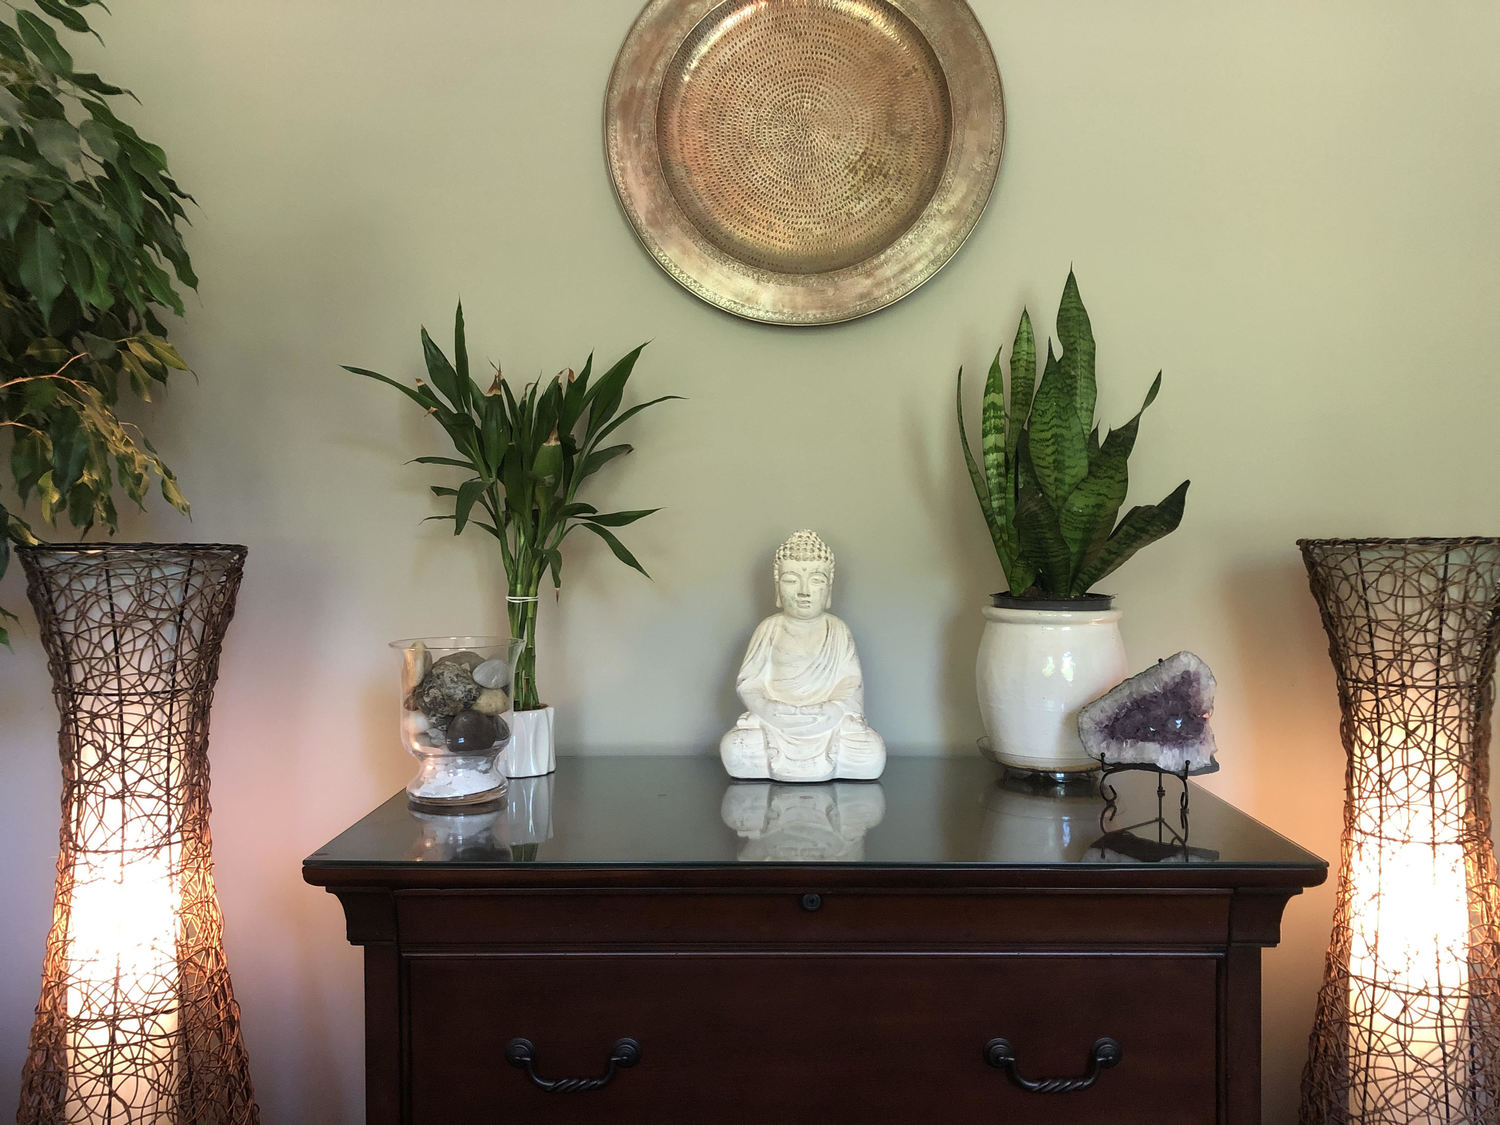 Gallery Photo of Welcome! I conduct my online sessions from this space with hopes to evoke a sense of peace & ease for clients.